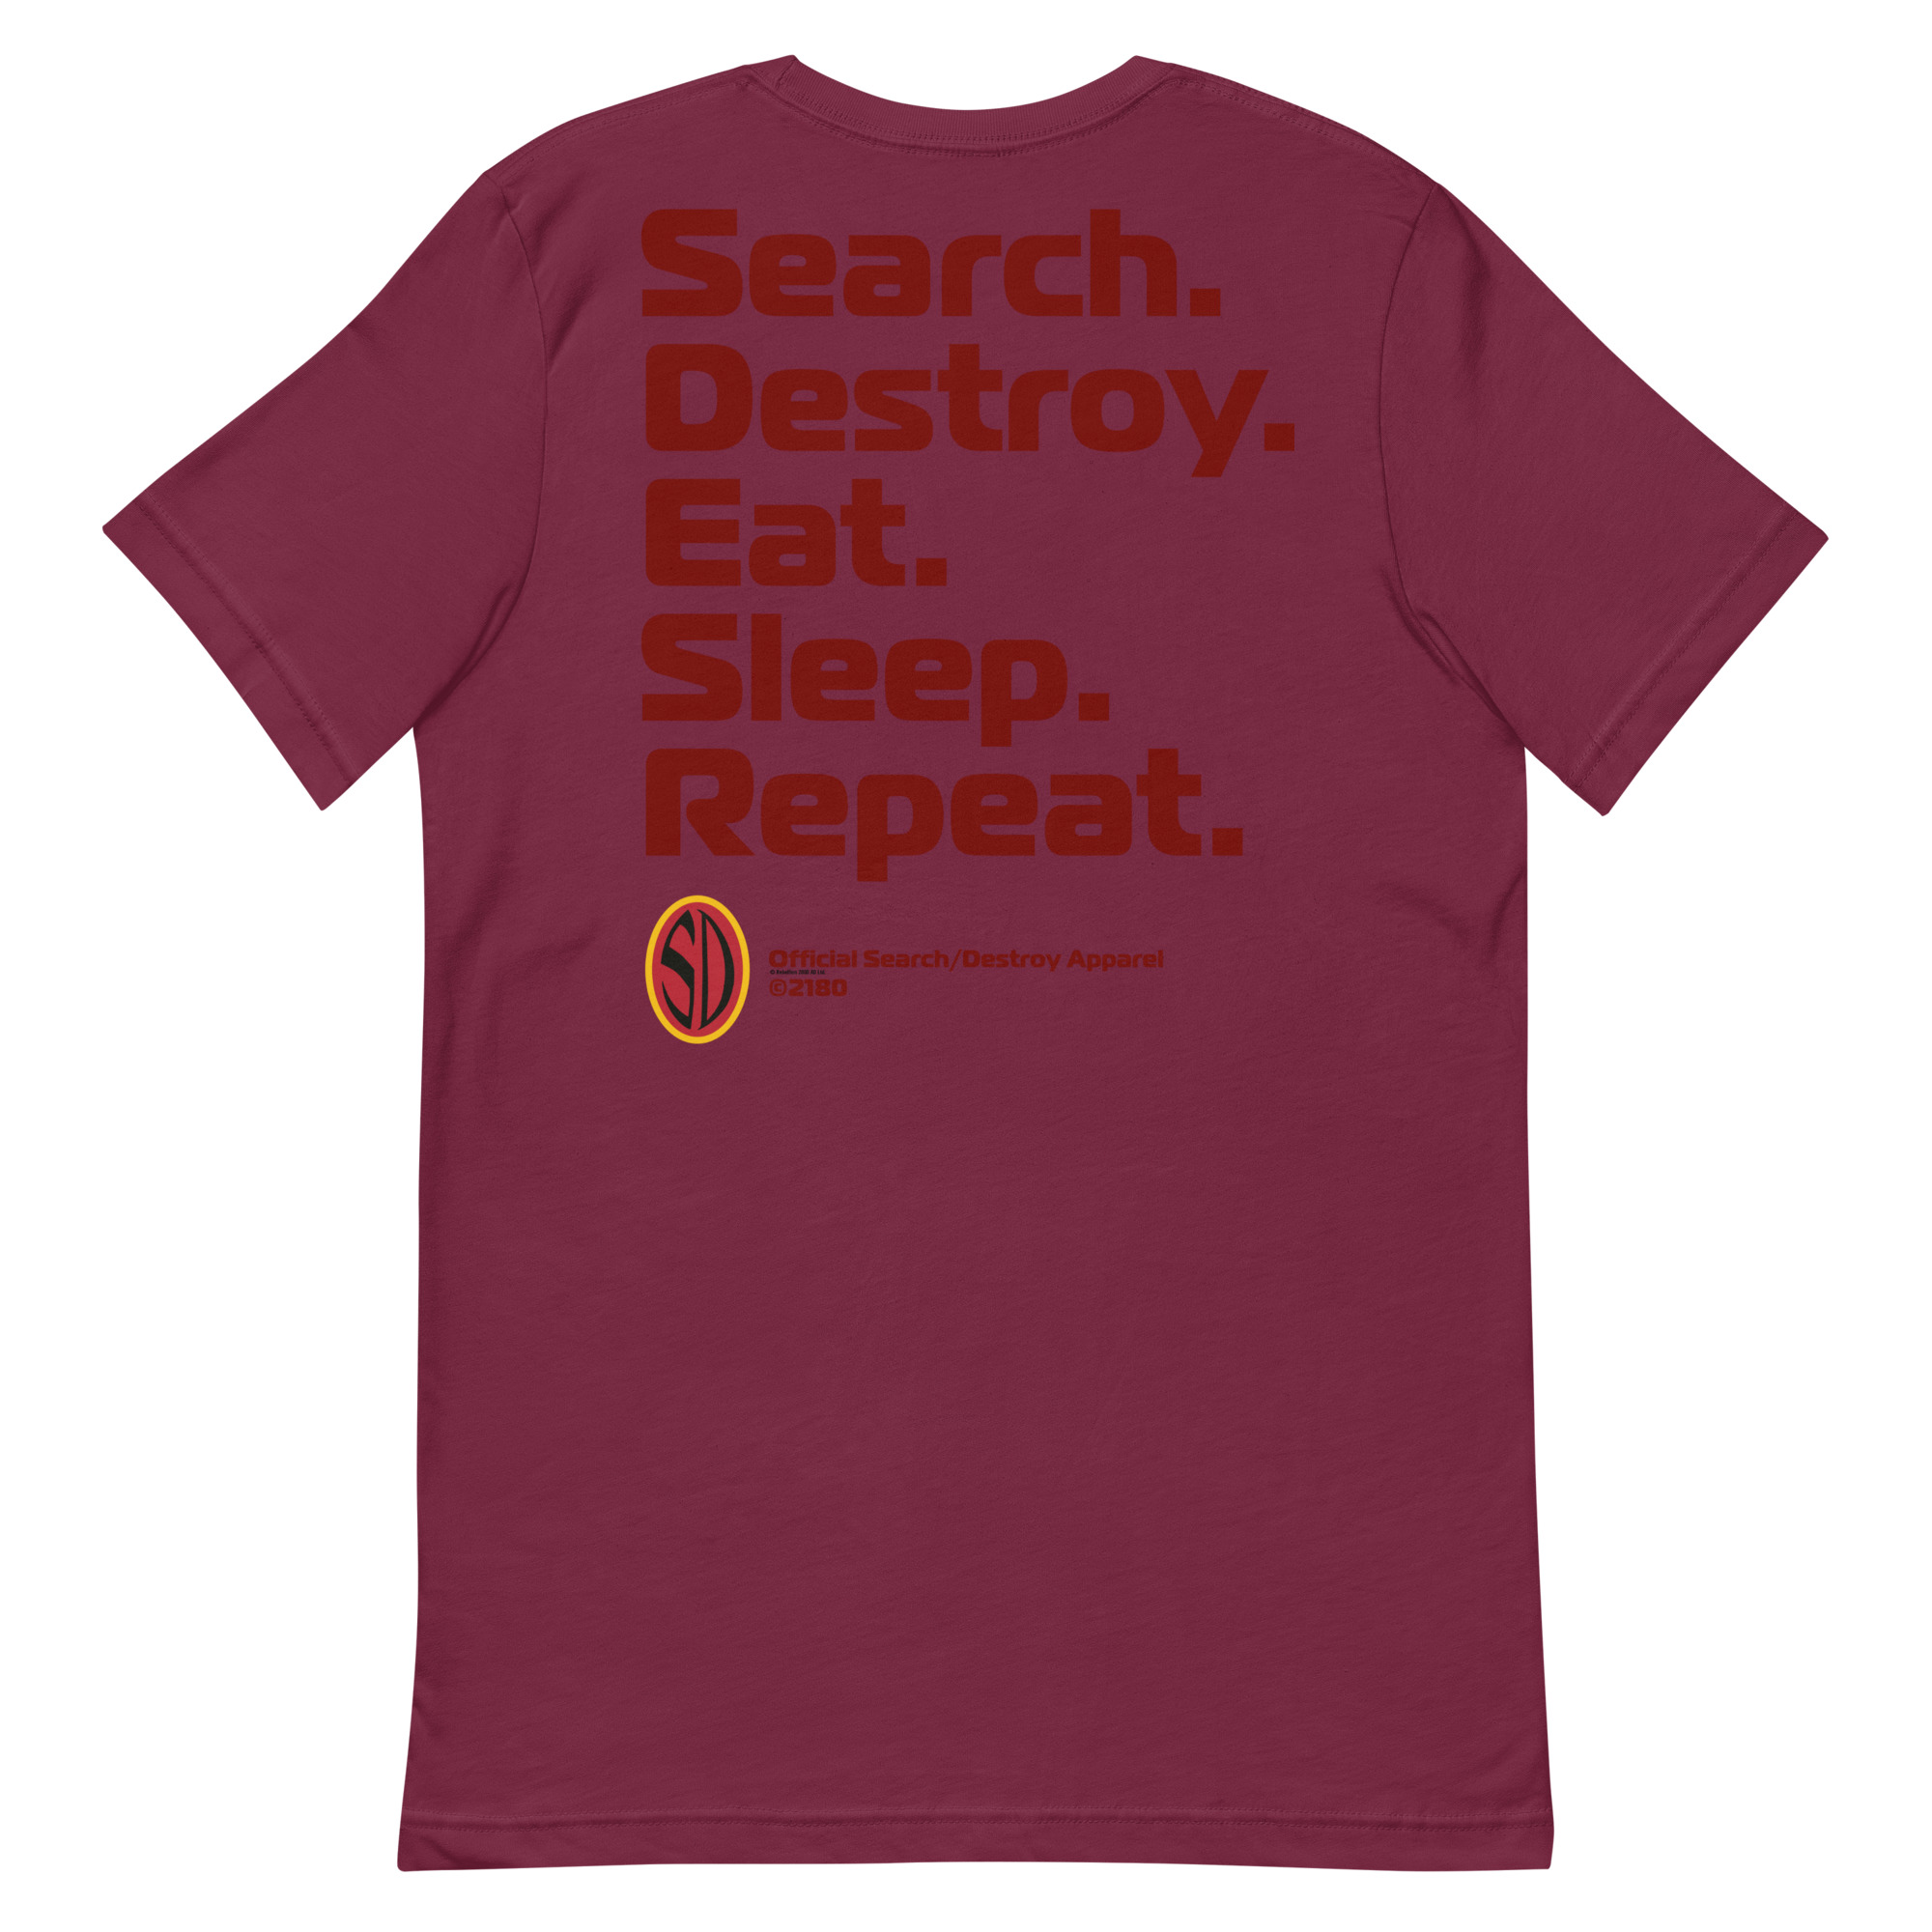 Maroon Tshirt, on which the words 